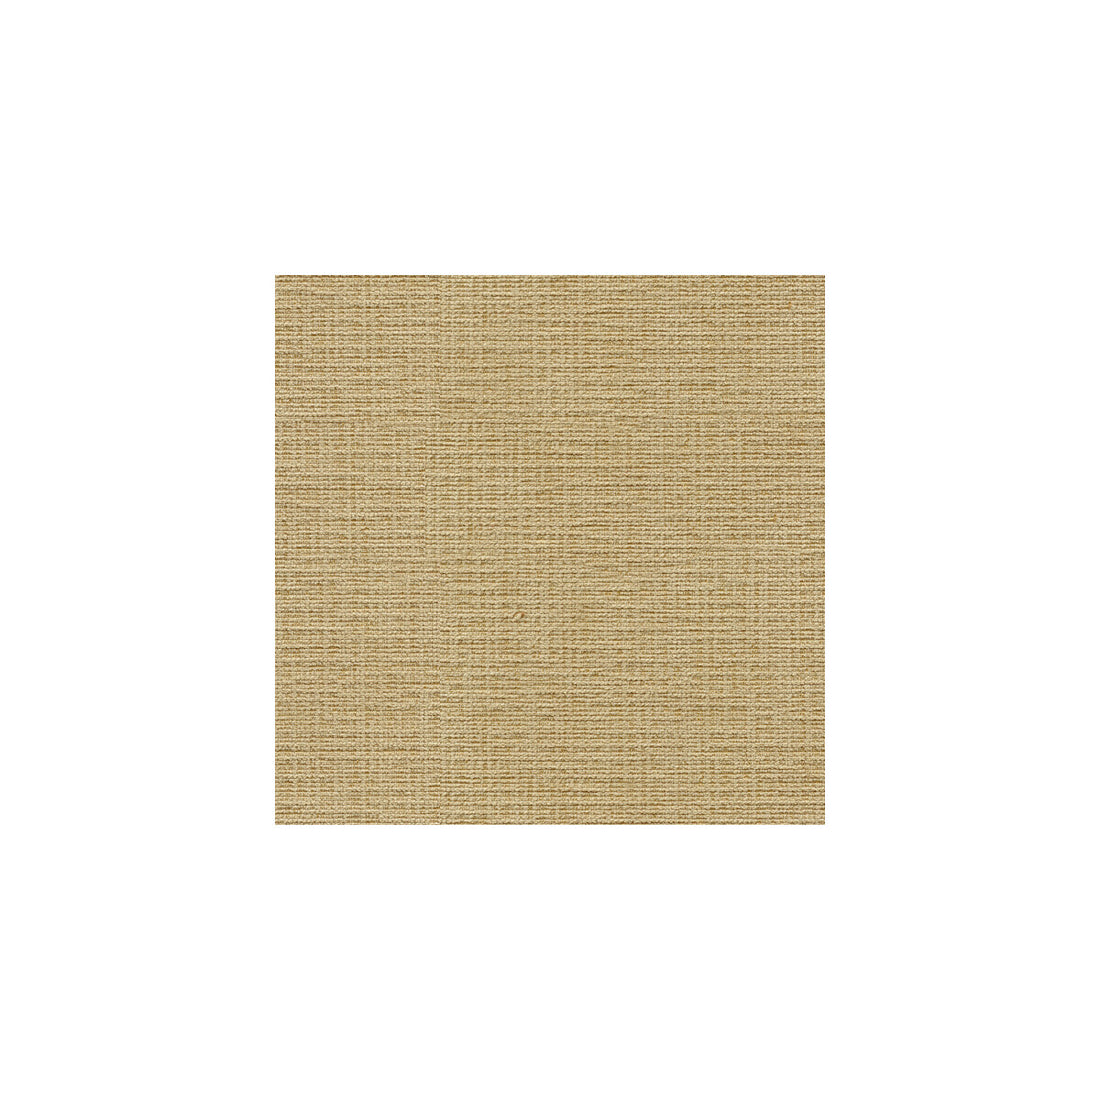 Kravet Basics fabric in 32314-1616 color - pattern 32314.1616.0 - by Kravet Basics in the Perfect Plains collection